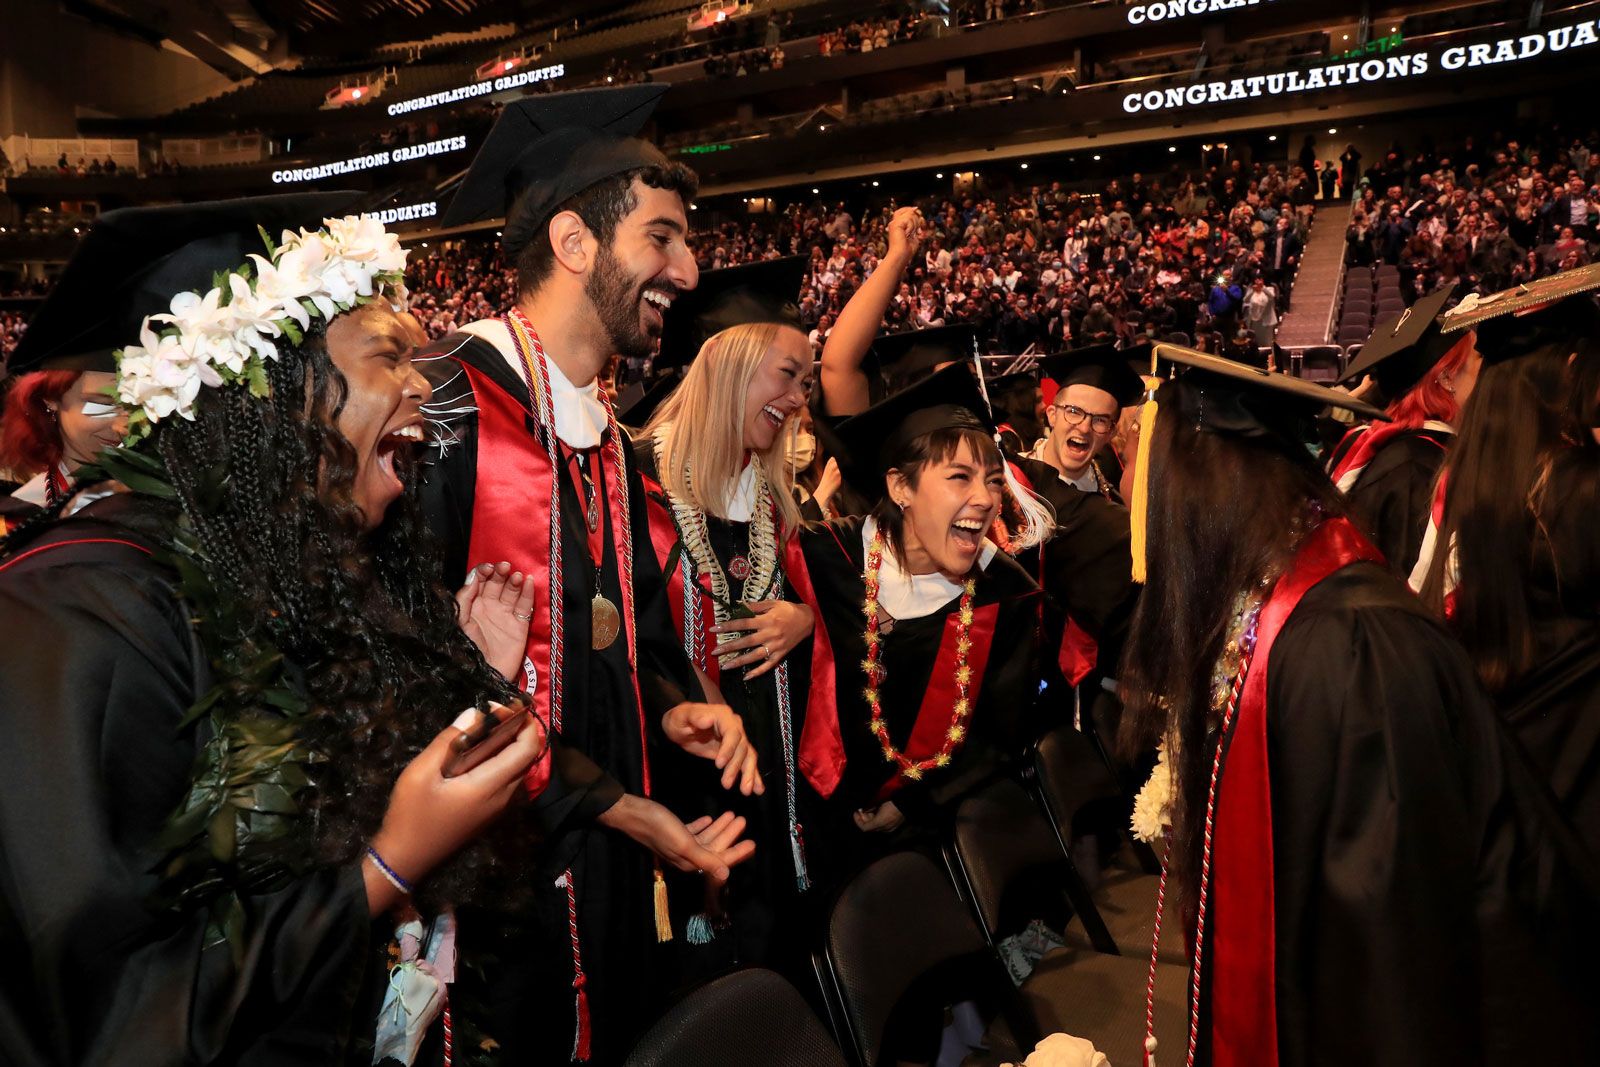 A group of grads in regalia, smiling, clapping and cheering excitedly inside Seattle's Climate Pledge Arena.